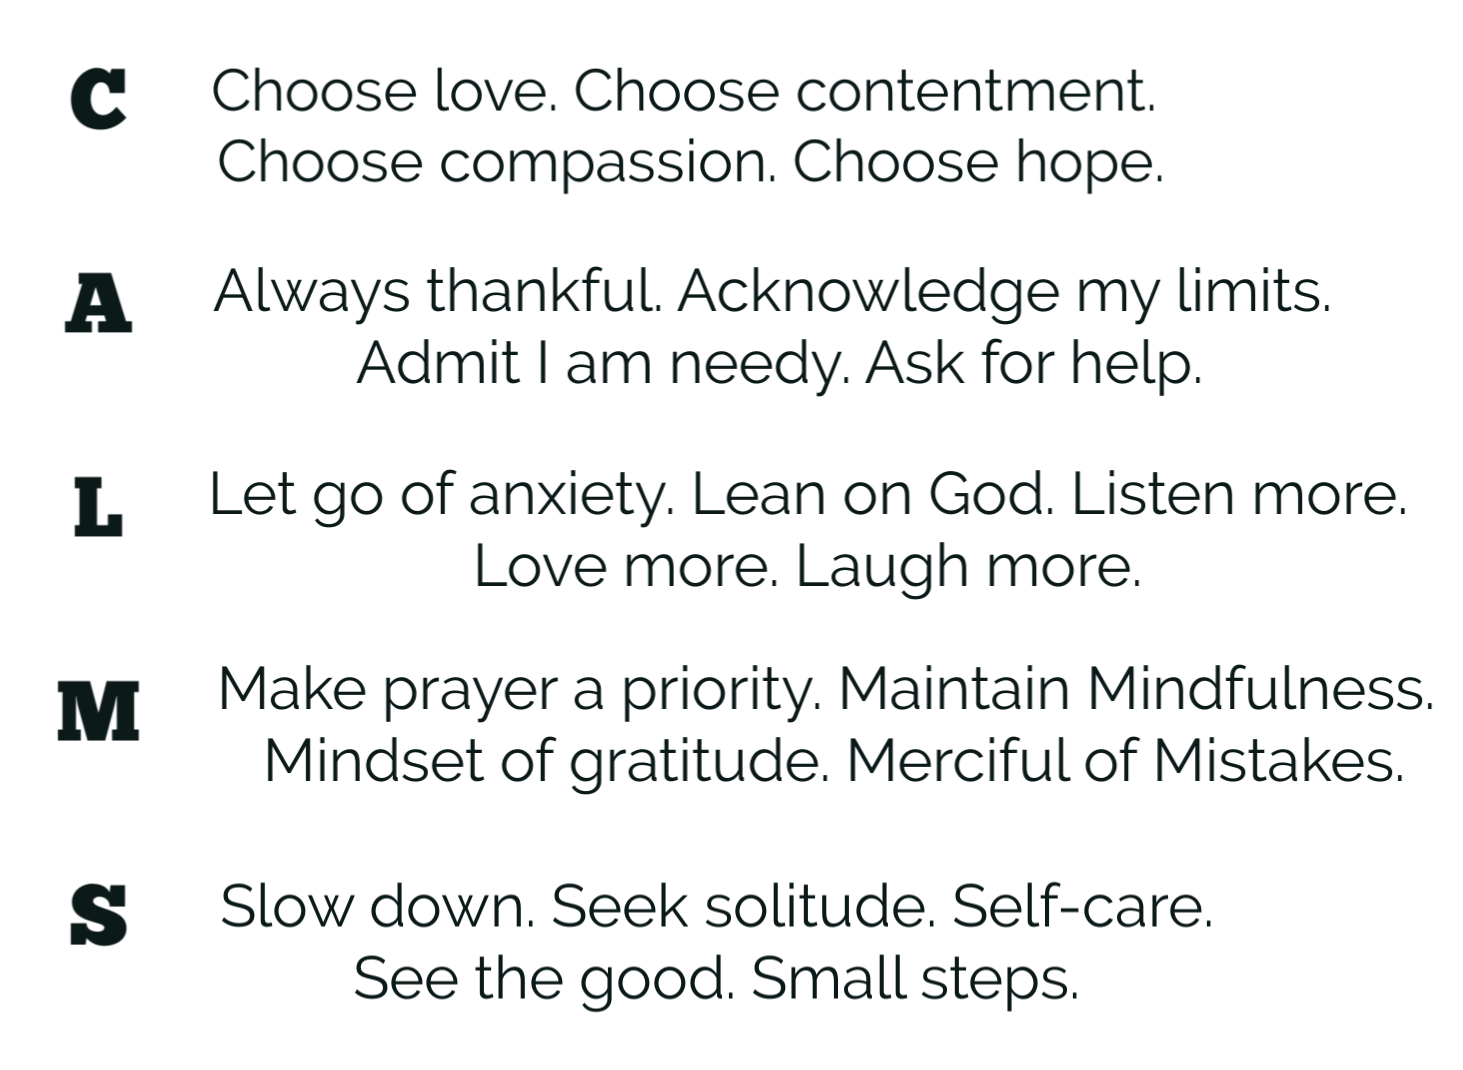 choose contentment, let go of anxiety, make prayer a priority